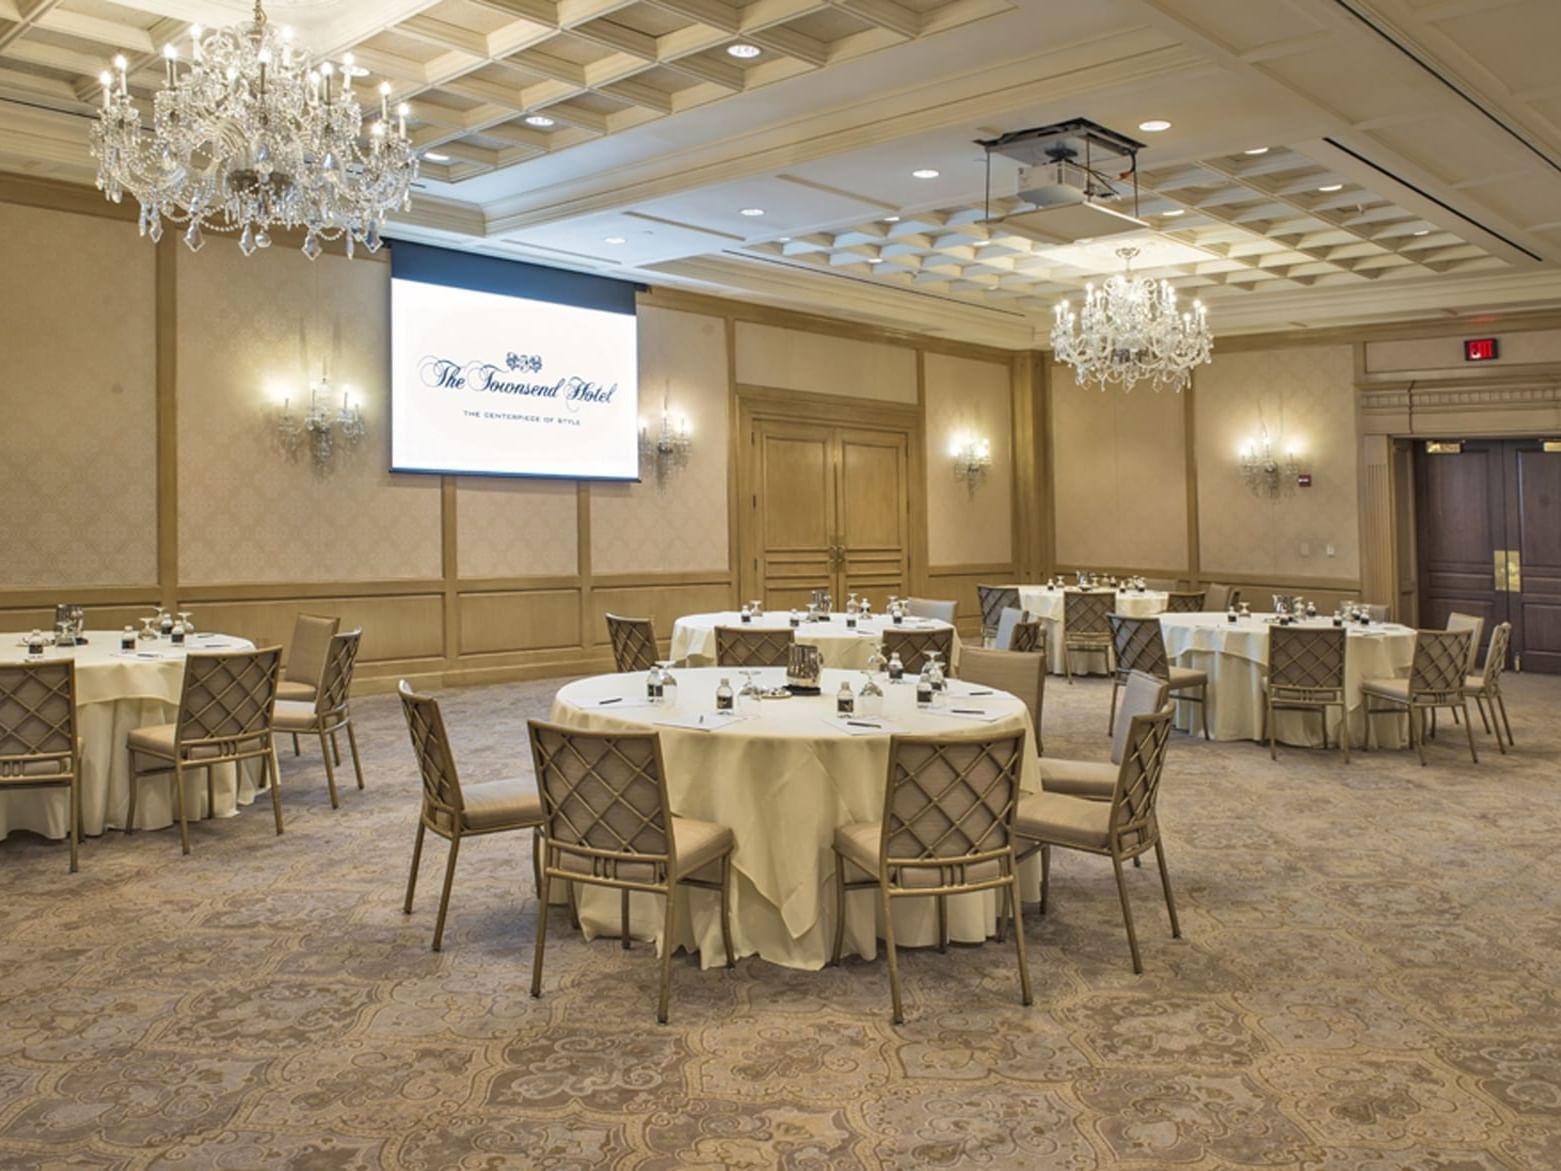 Round meeting tables arranged in Salon IV at The Townsend Hotel